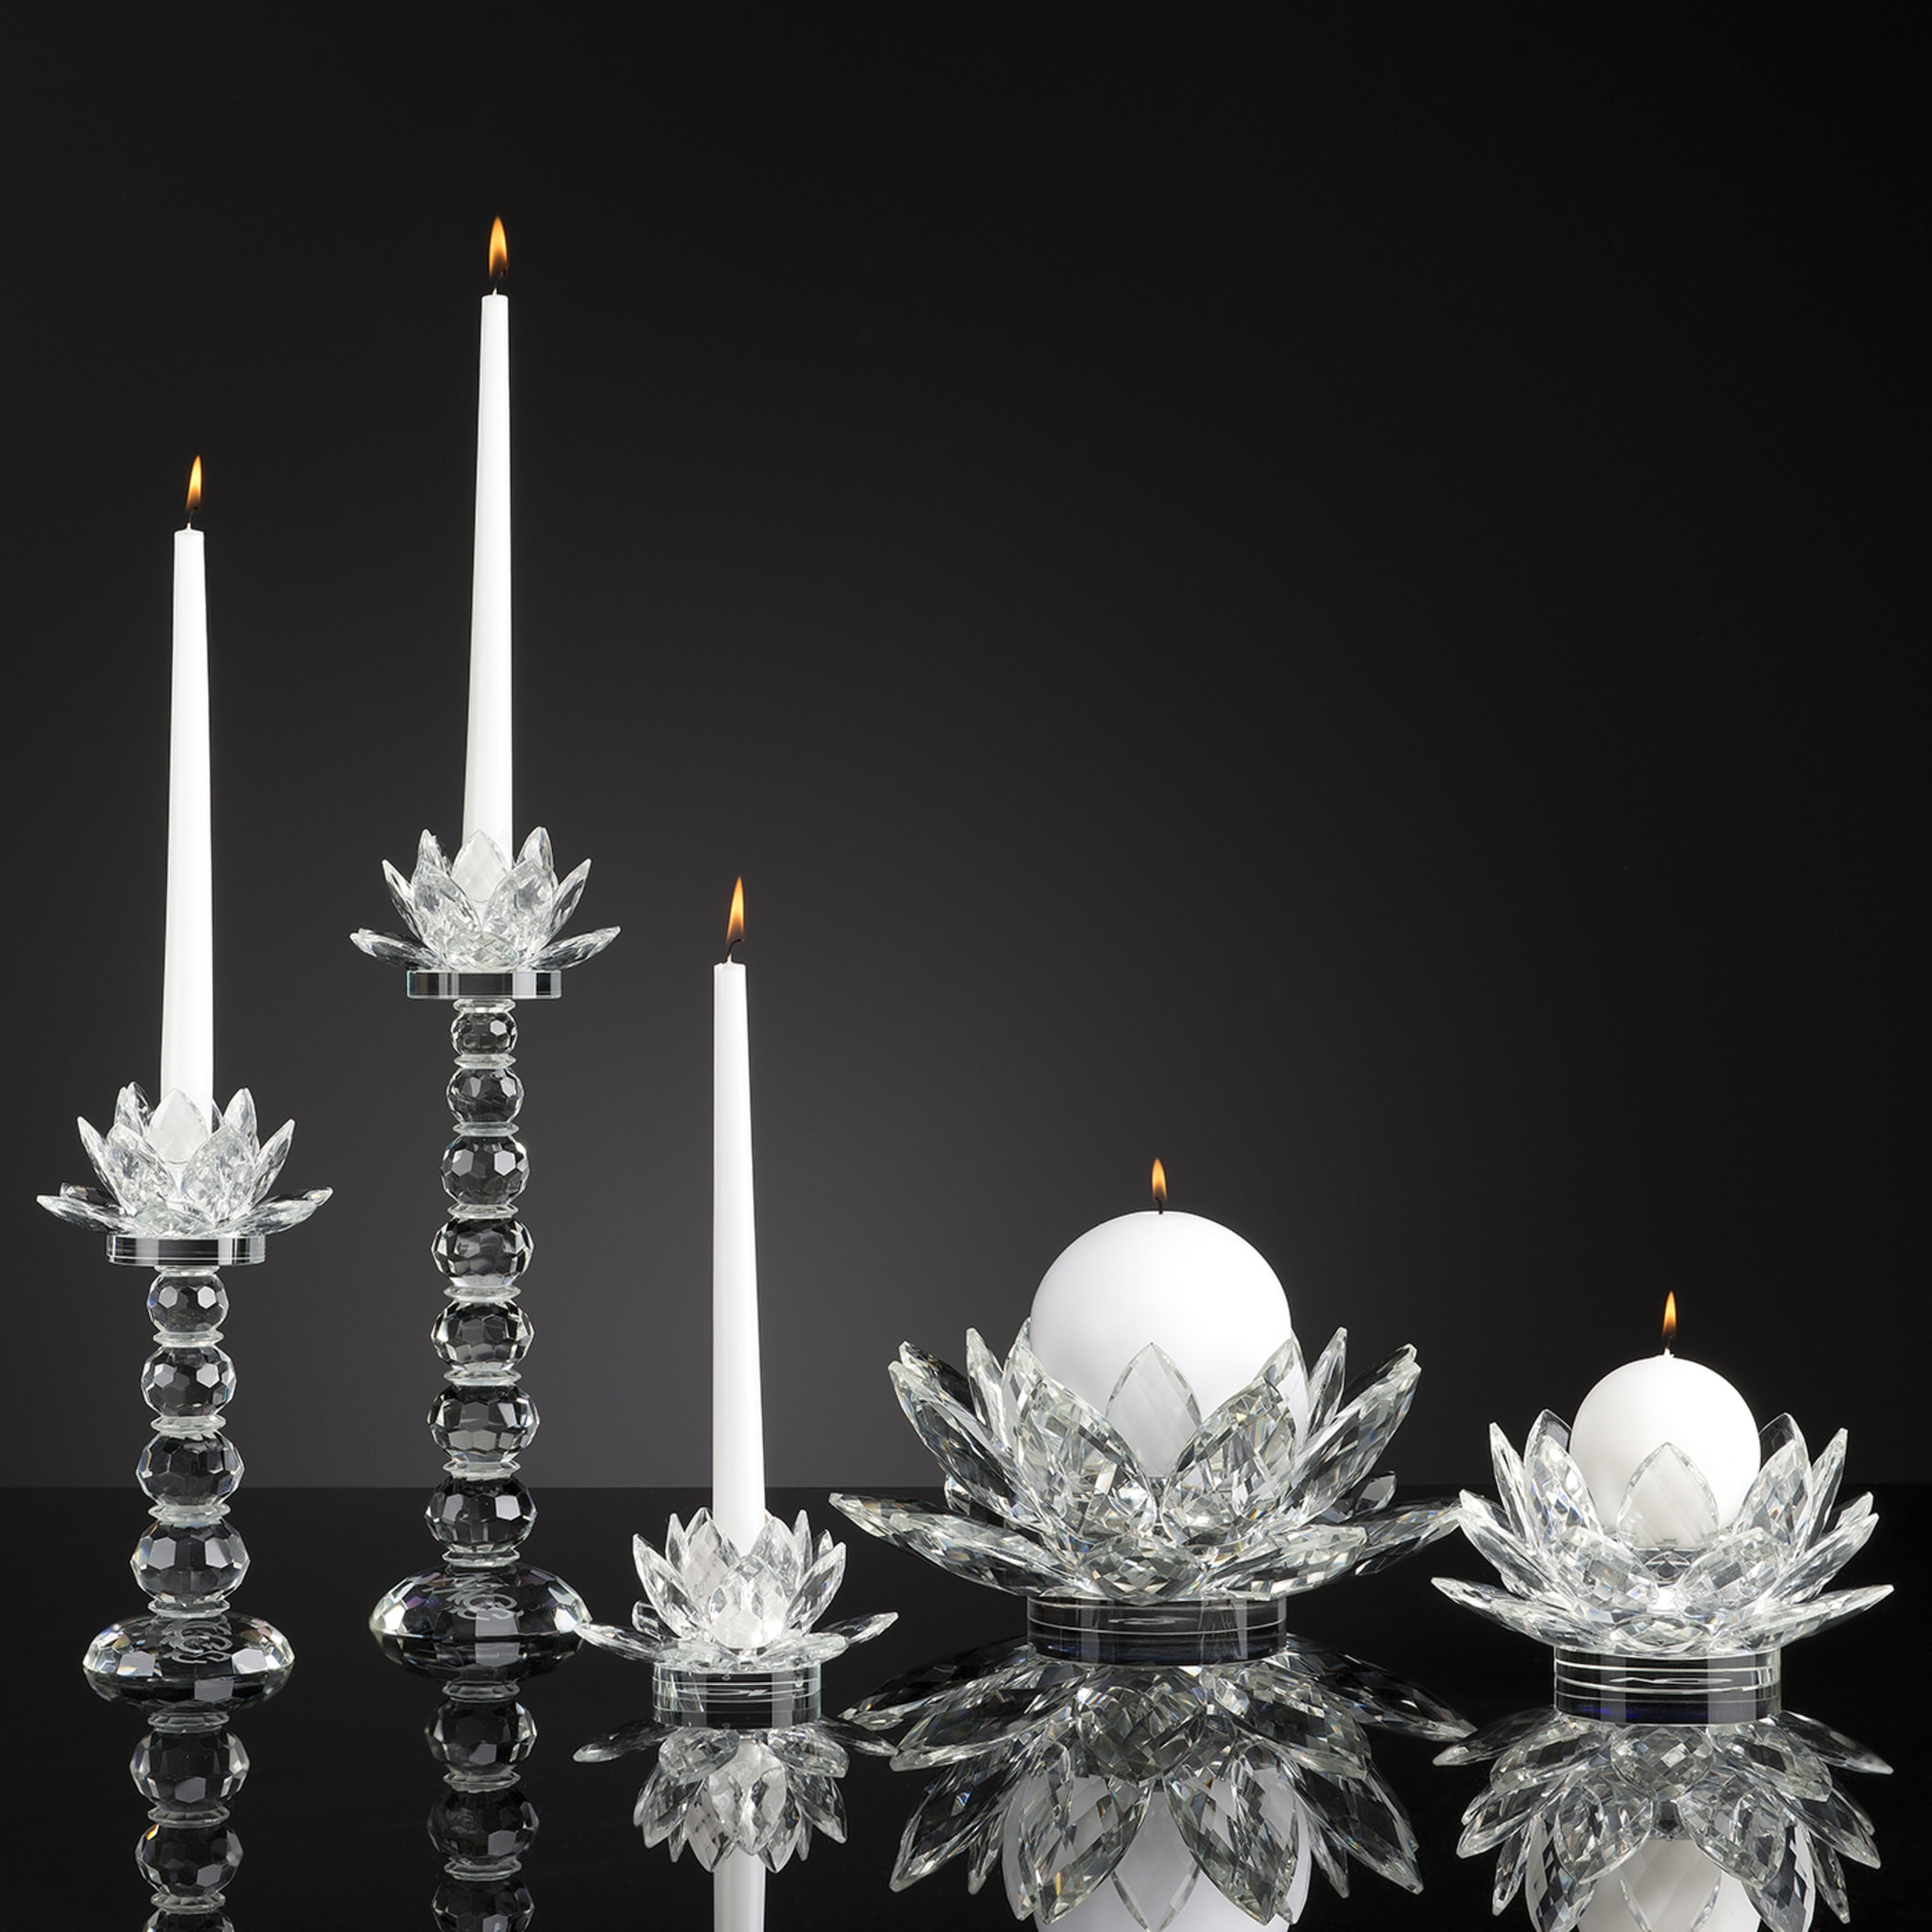 Small Lotus Crystal Candle Holder - Alternative view 3